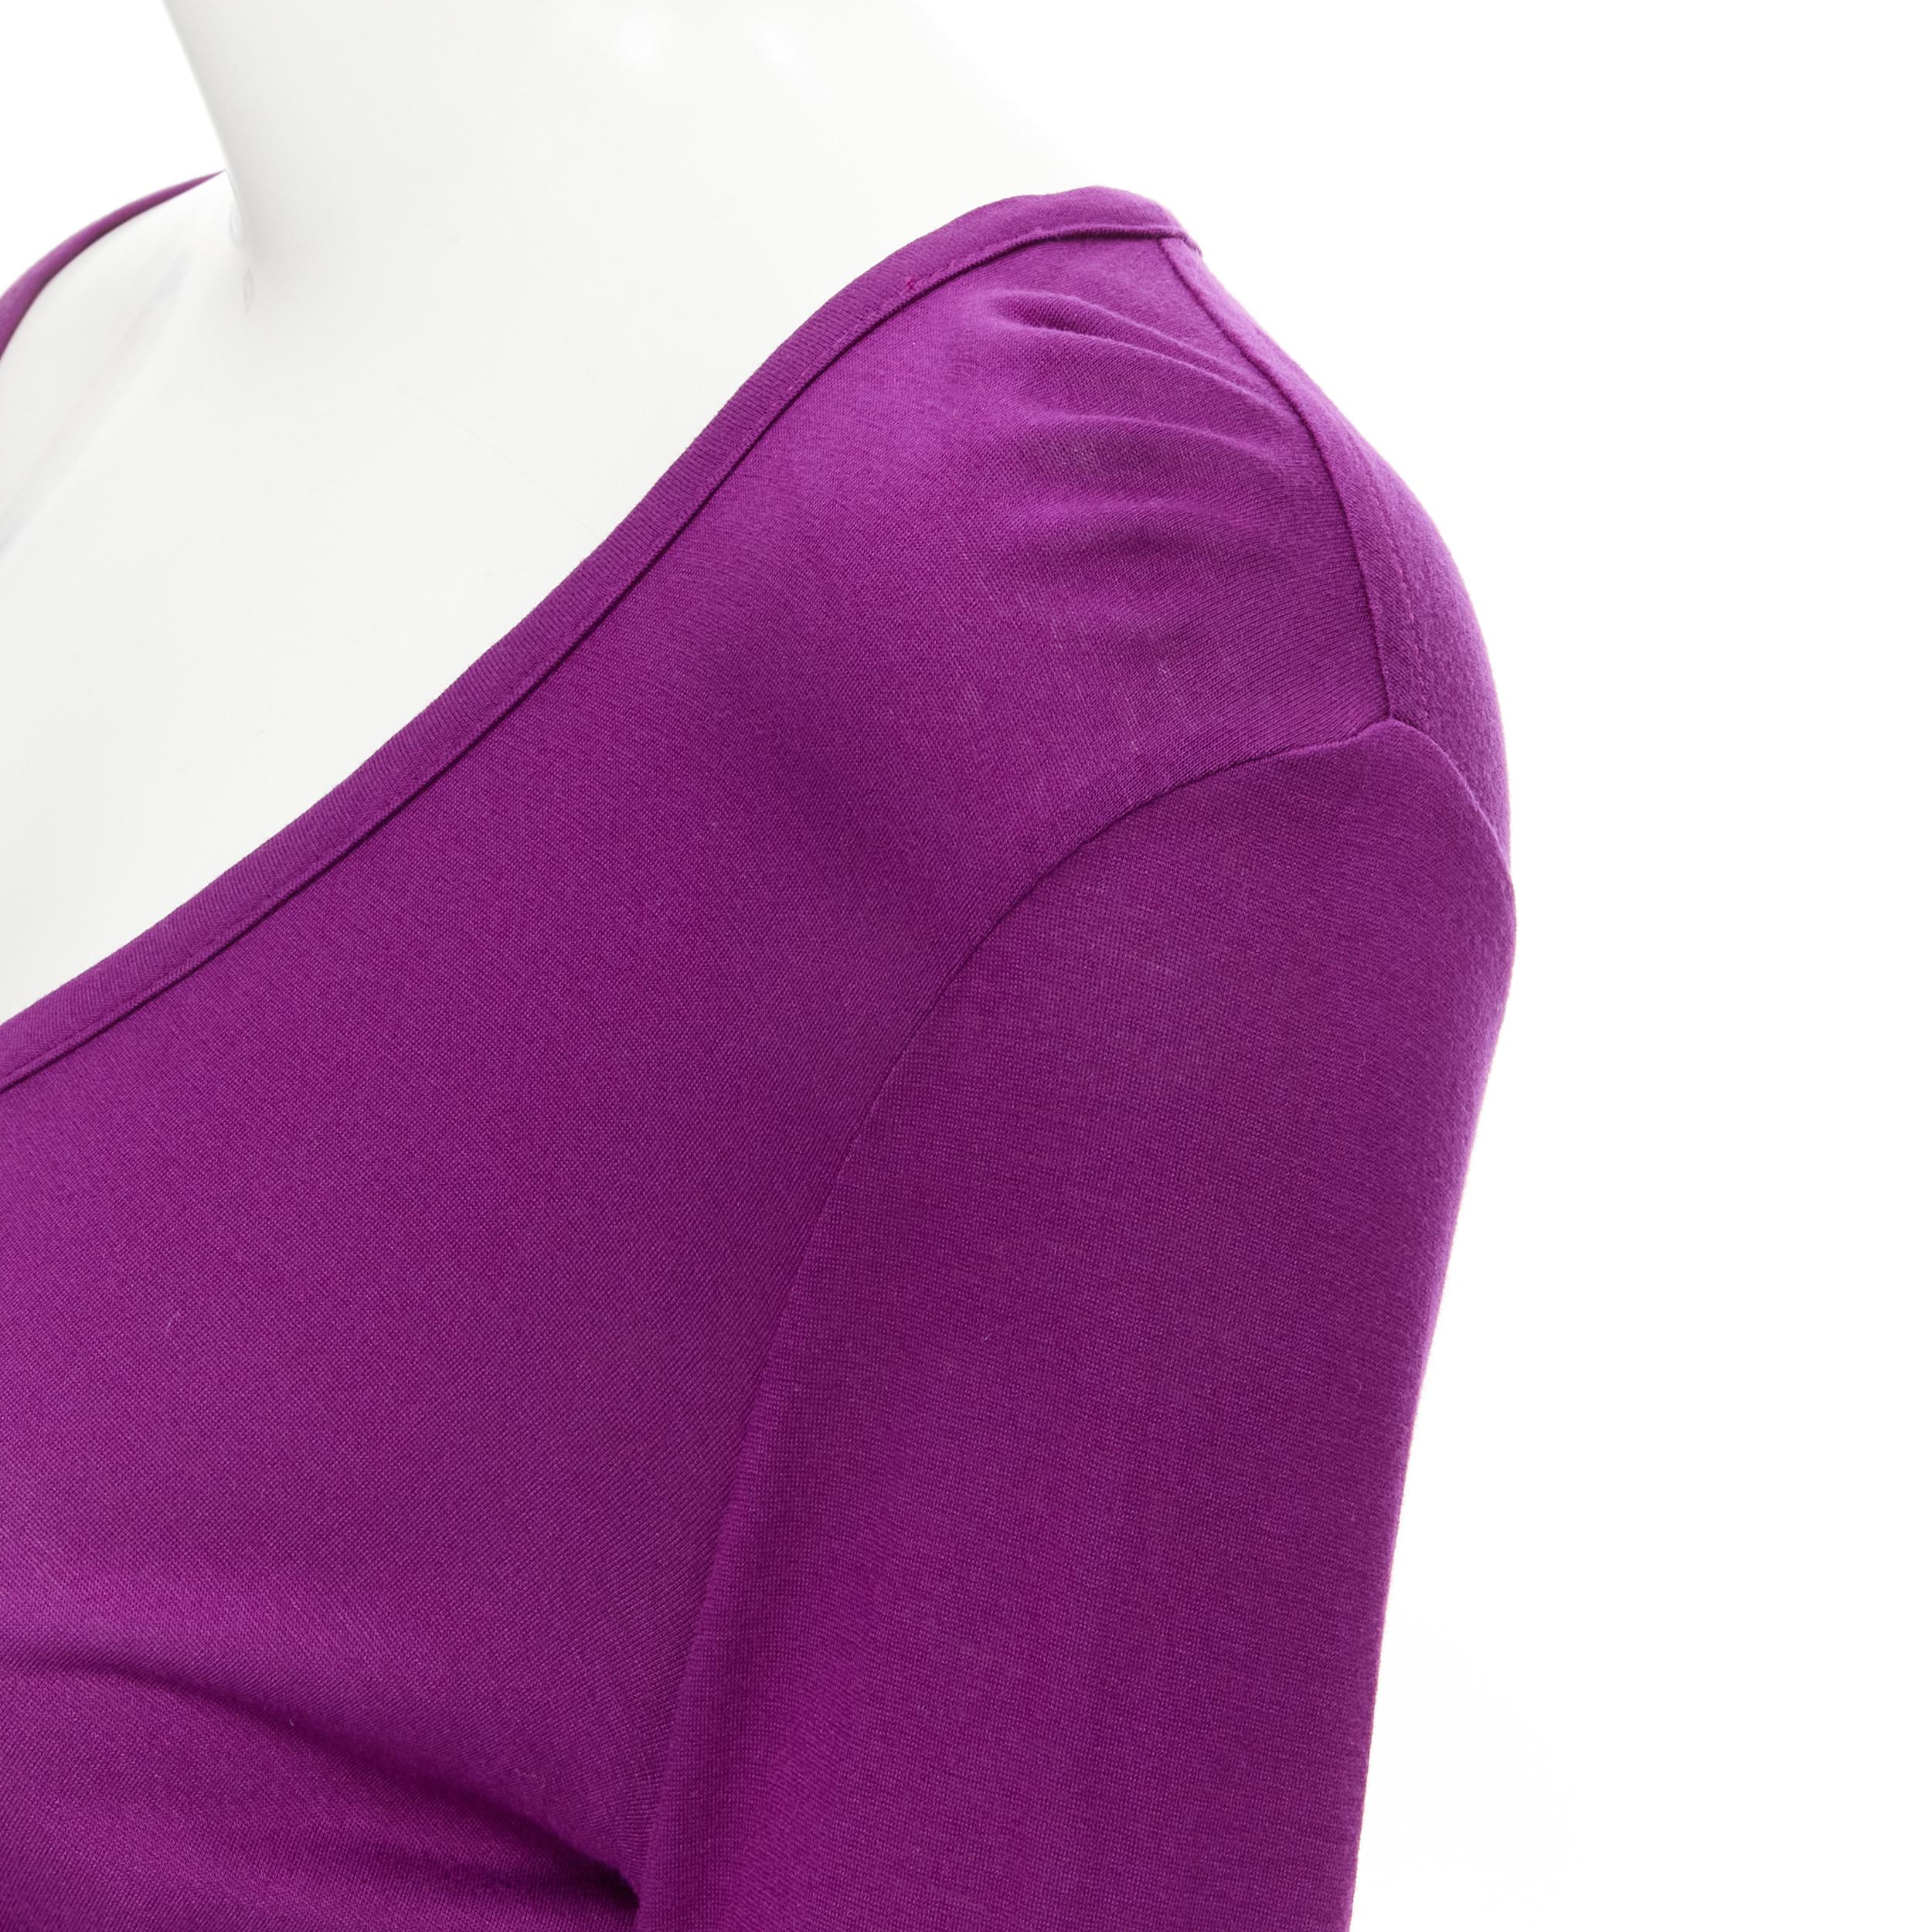 new THE ROW Hazelton 100% viscose purple scoop neck long sleeve tshirt S 
Reference: MELK/A00115 
Brand: The Row 
Material: Viscose 
Color: Purple 
Pattern: Solid 
Made in: USA 

CONDITION: 
Condition: New with tags. 
Comes with: Designer tags.